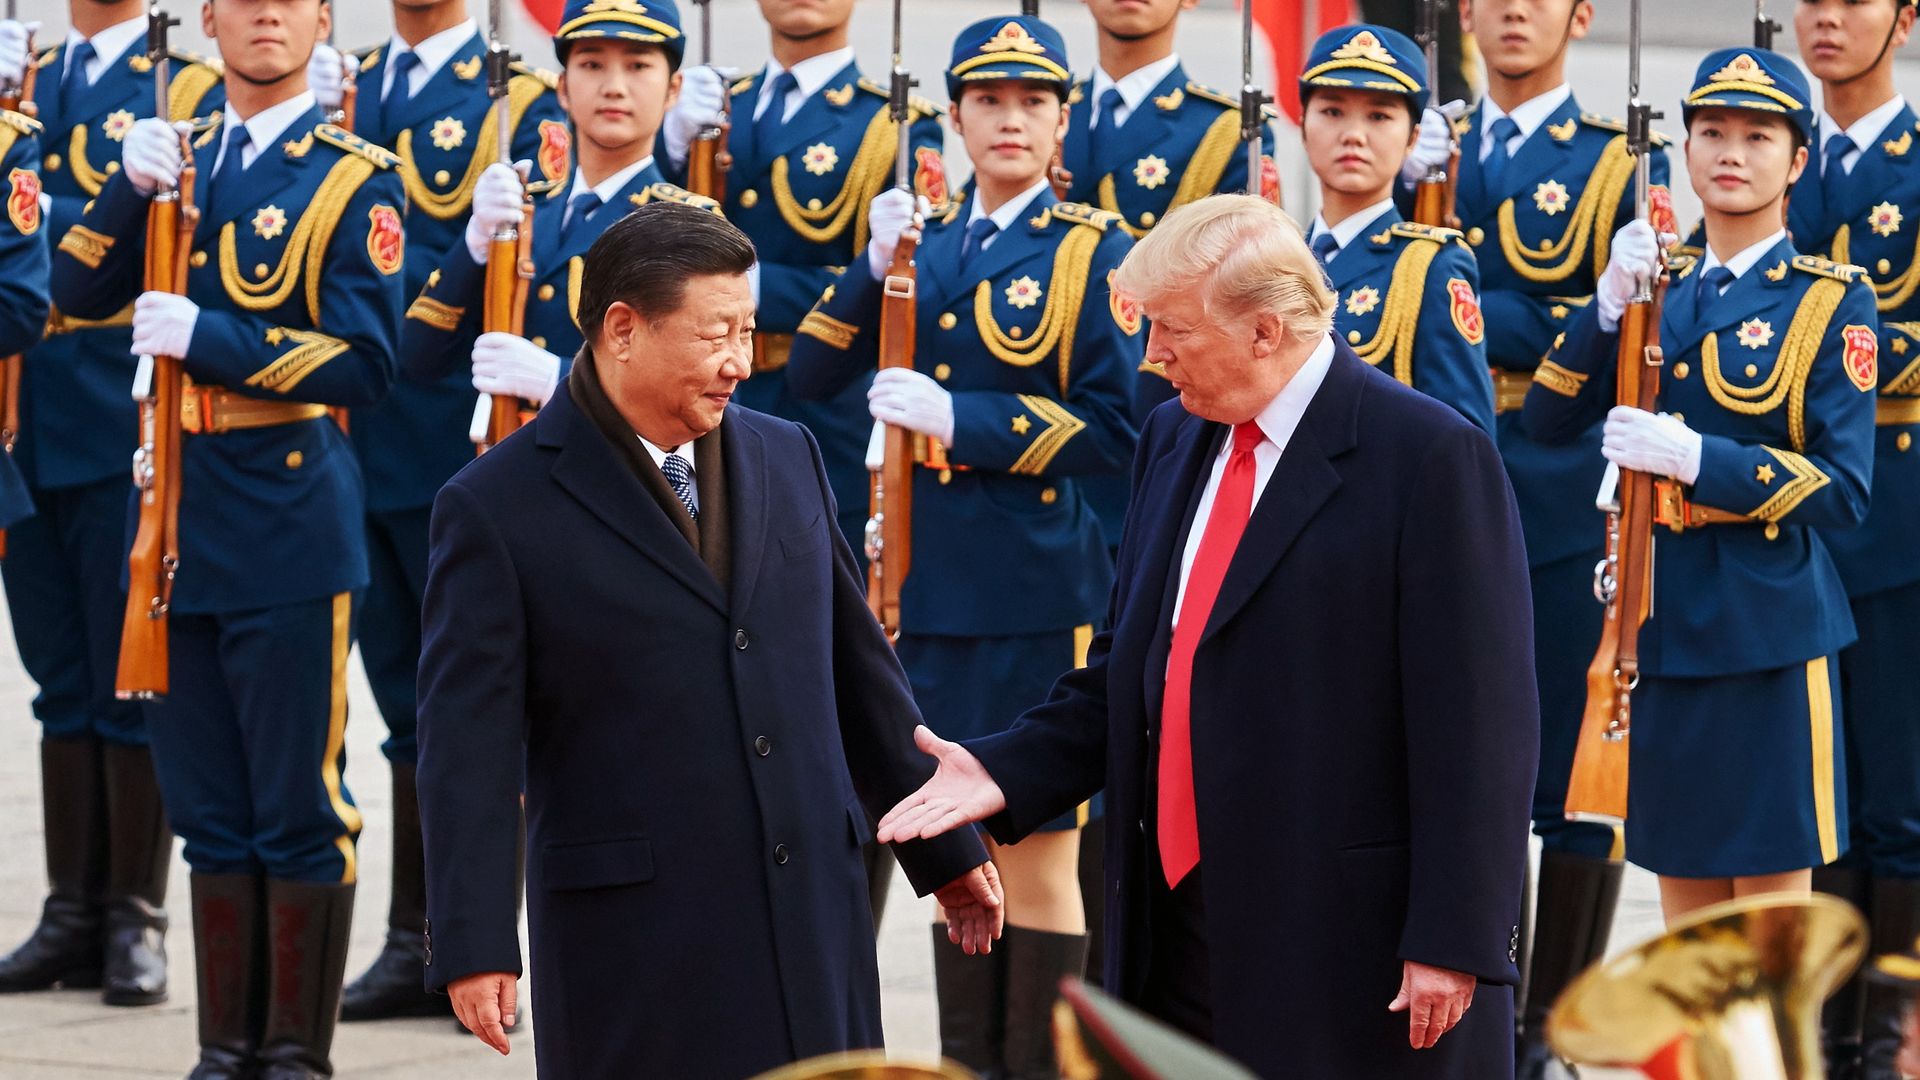 China's President Xi Jinping and US President Donald Trump shaking hands